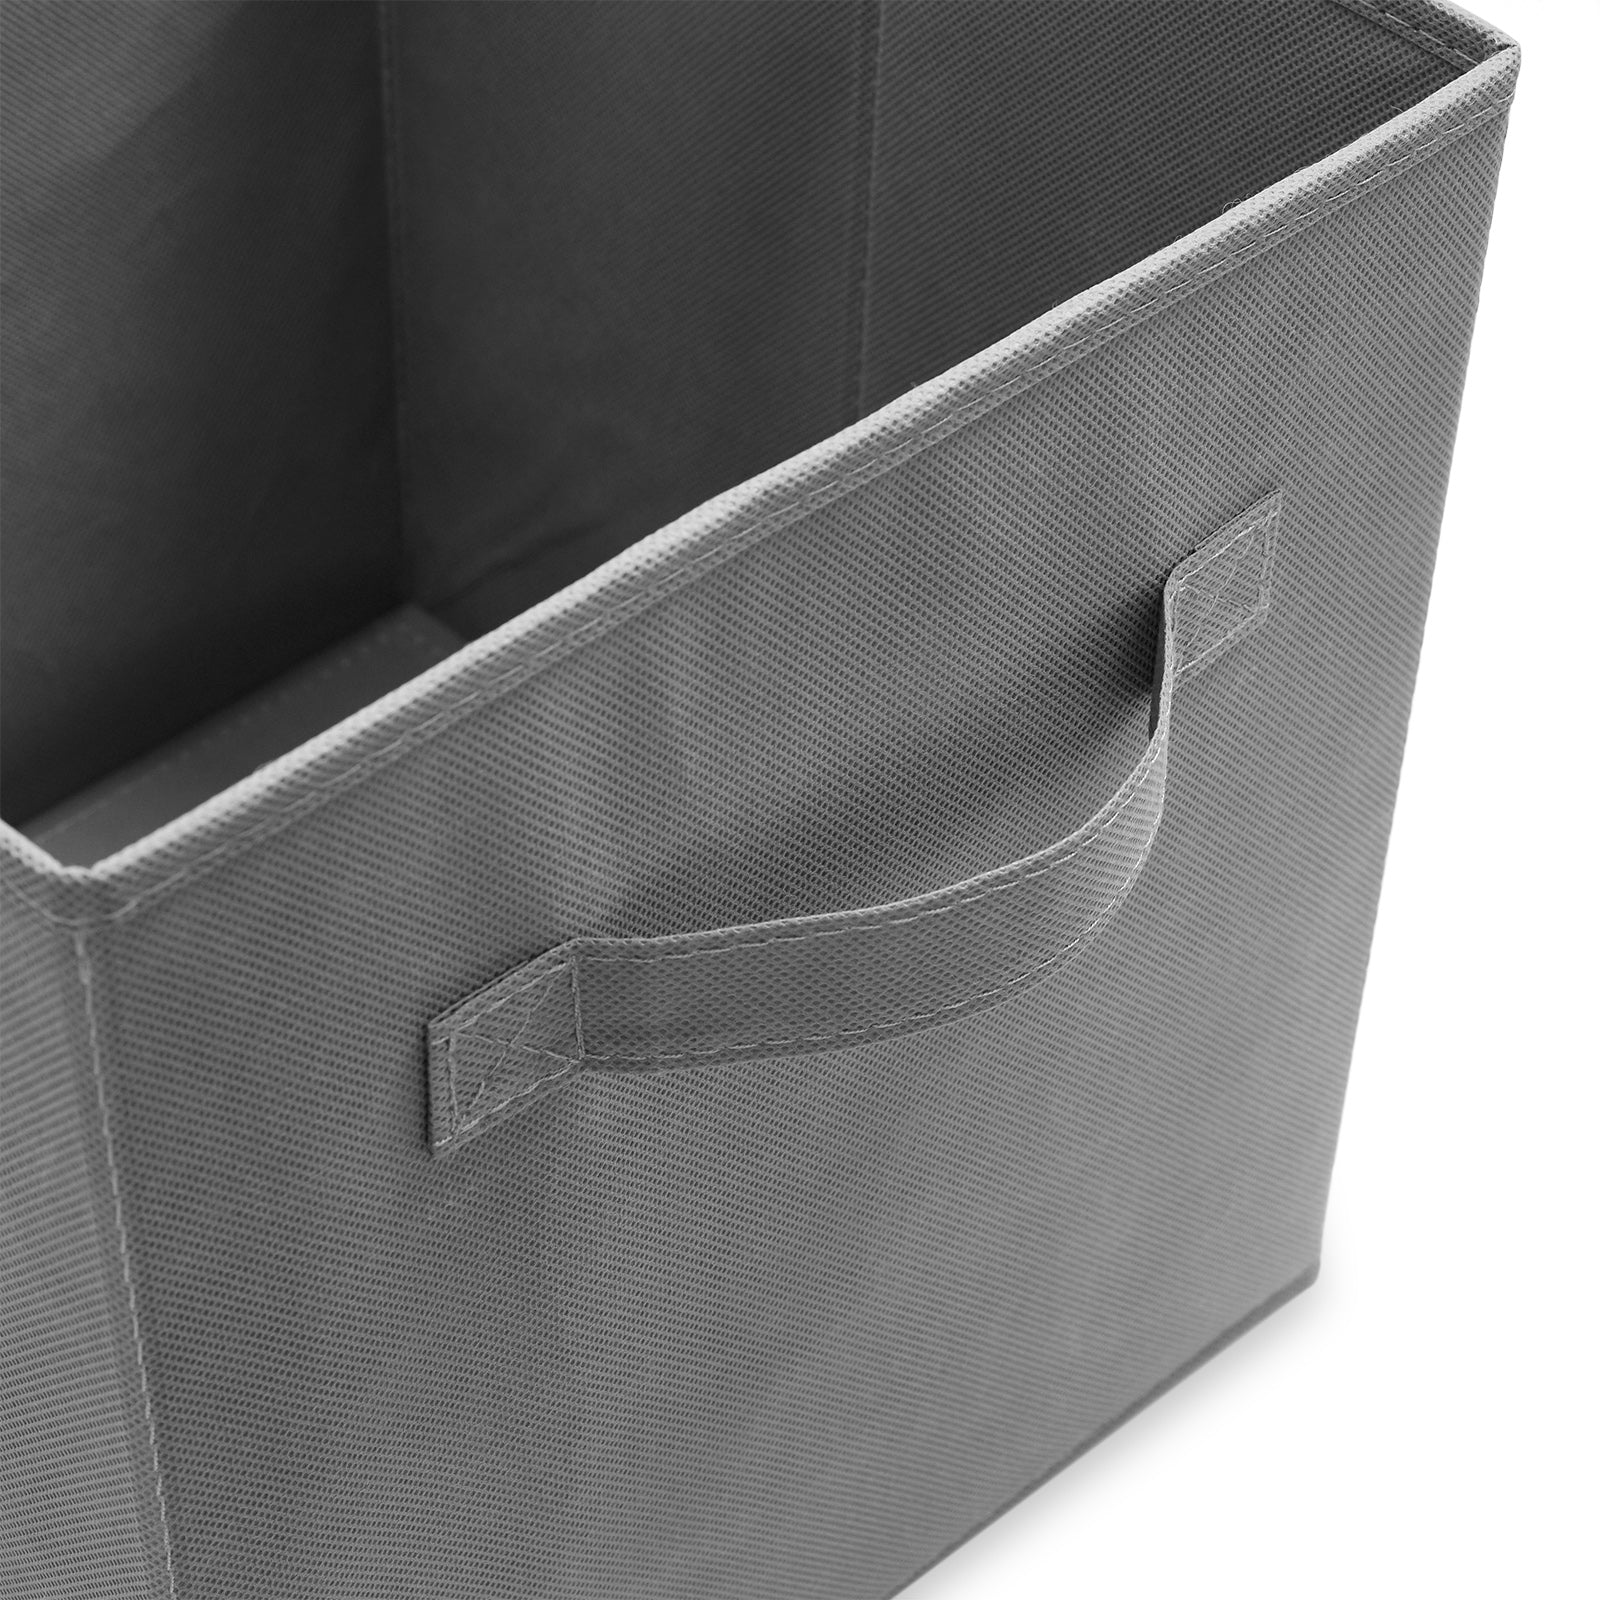 SUGIFT Collapsible Fabric Cube Storage Bins Cloth Baskets£¬Set of 6